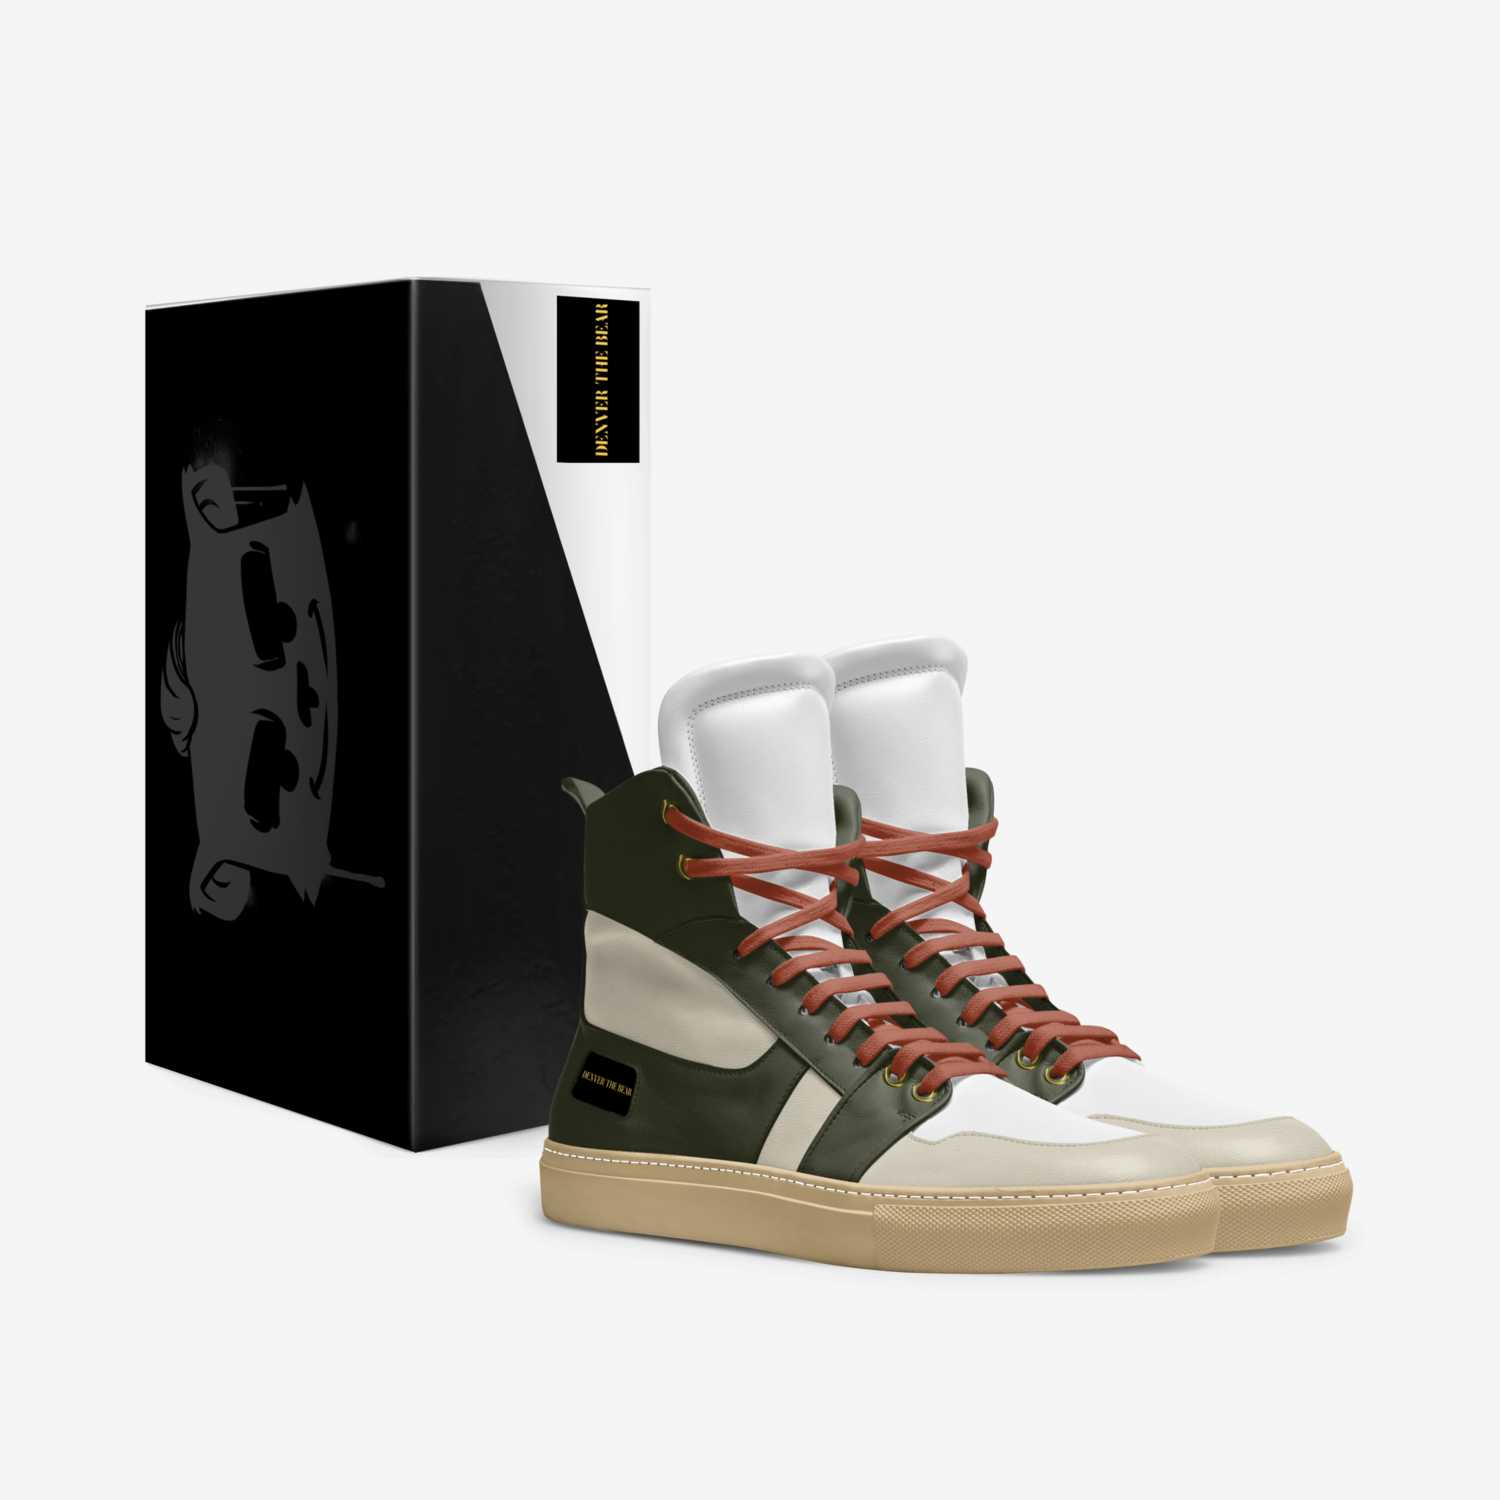 Dtb ultra high top custom made in Italy shoes by Slippyninja Collins | Box view